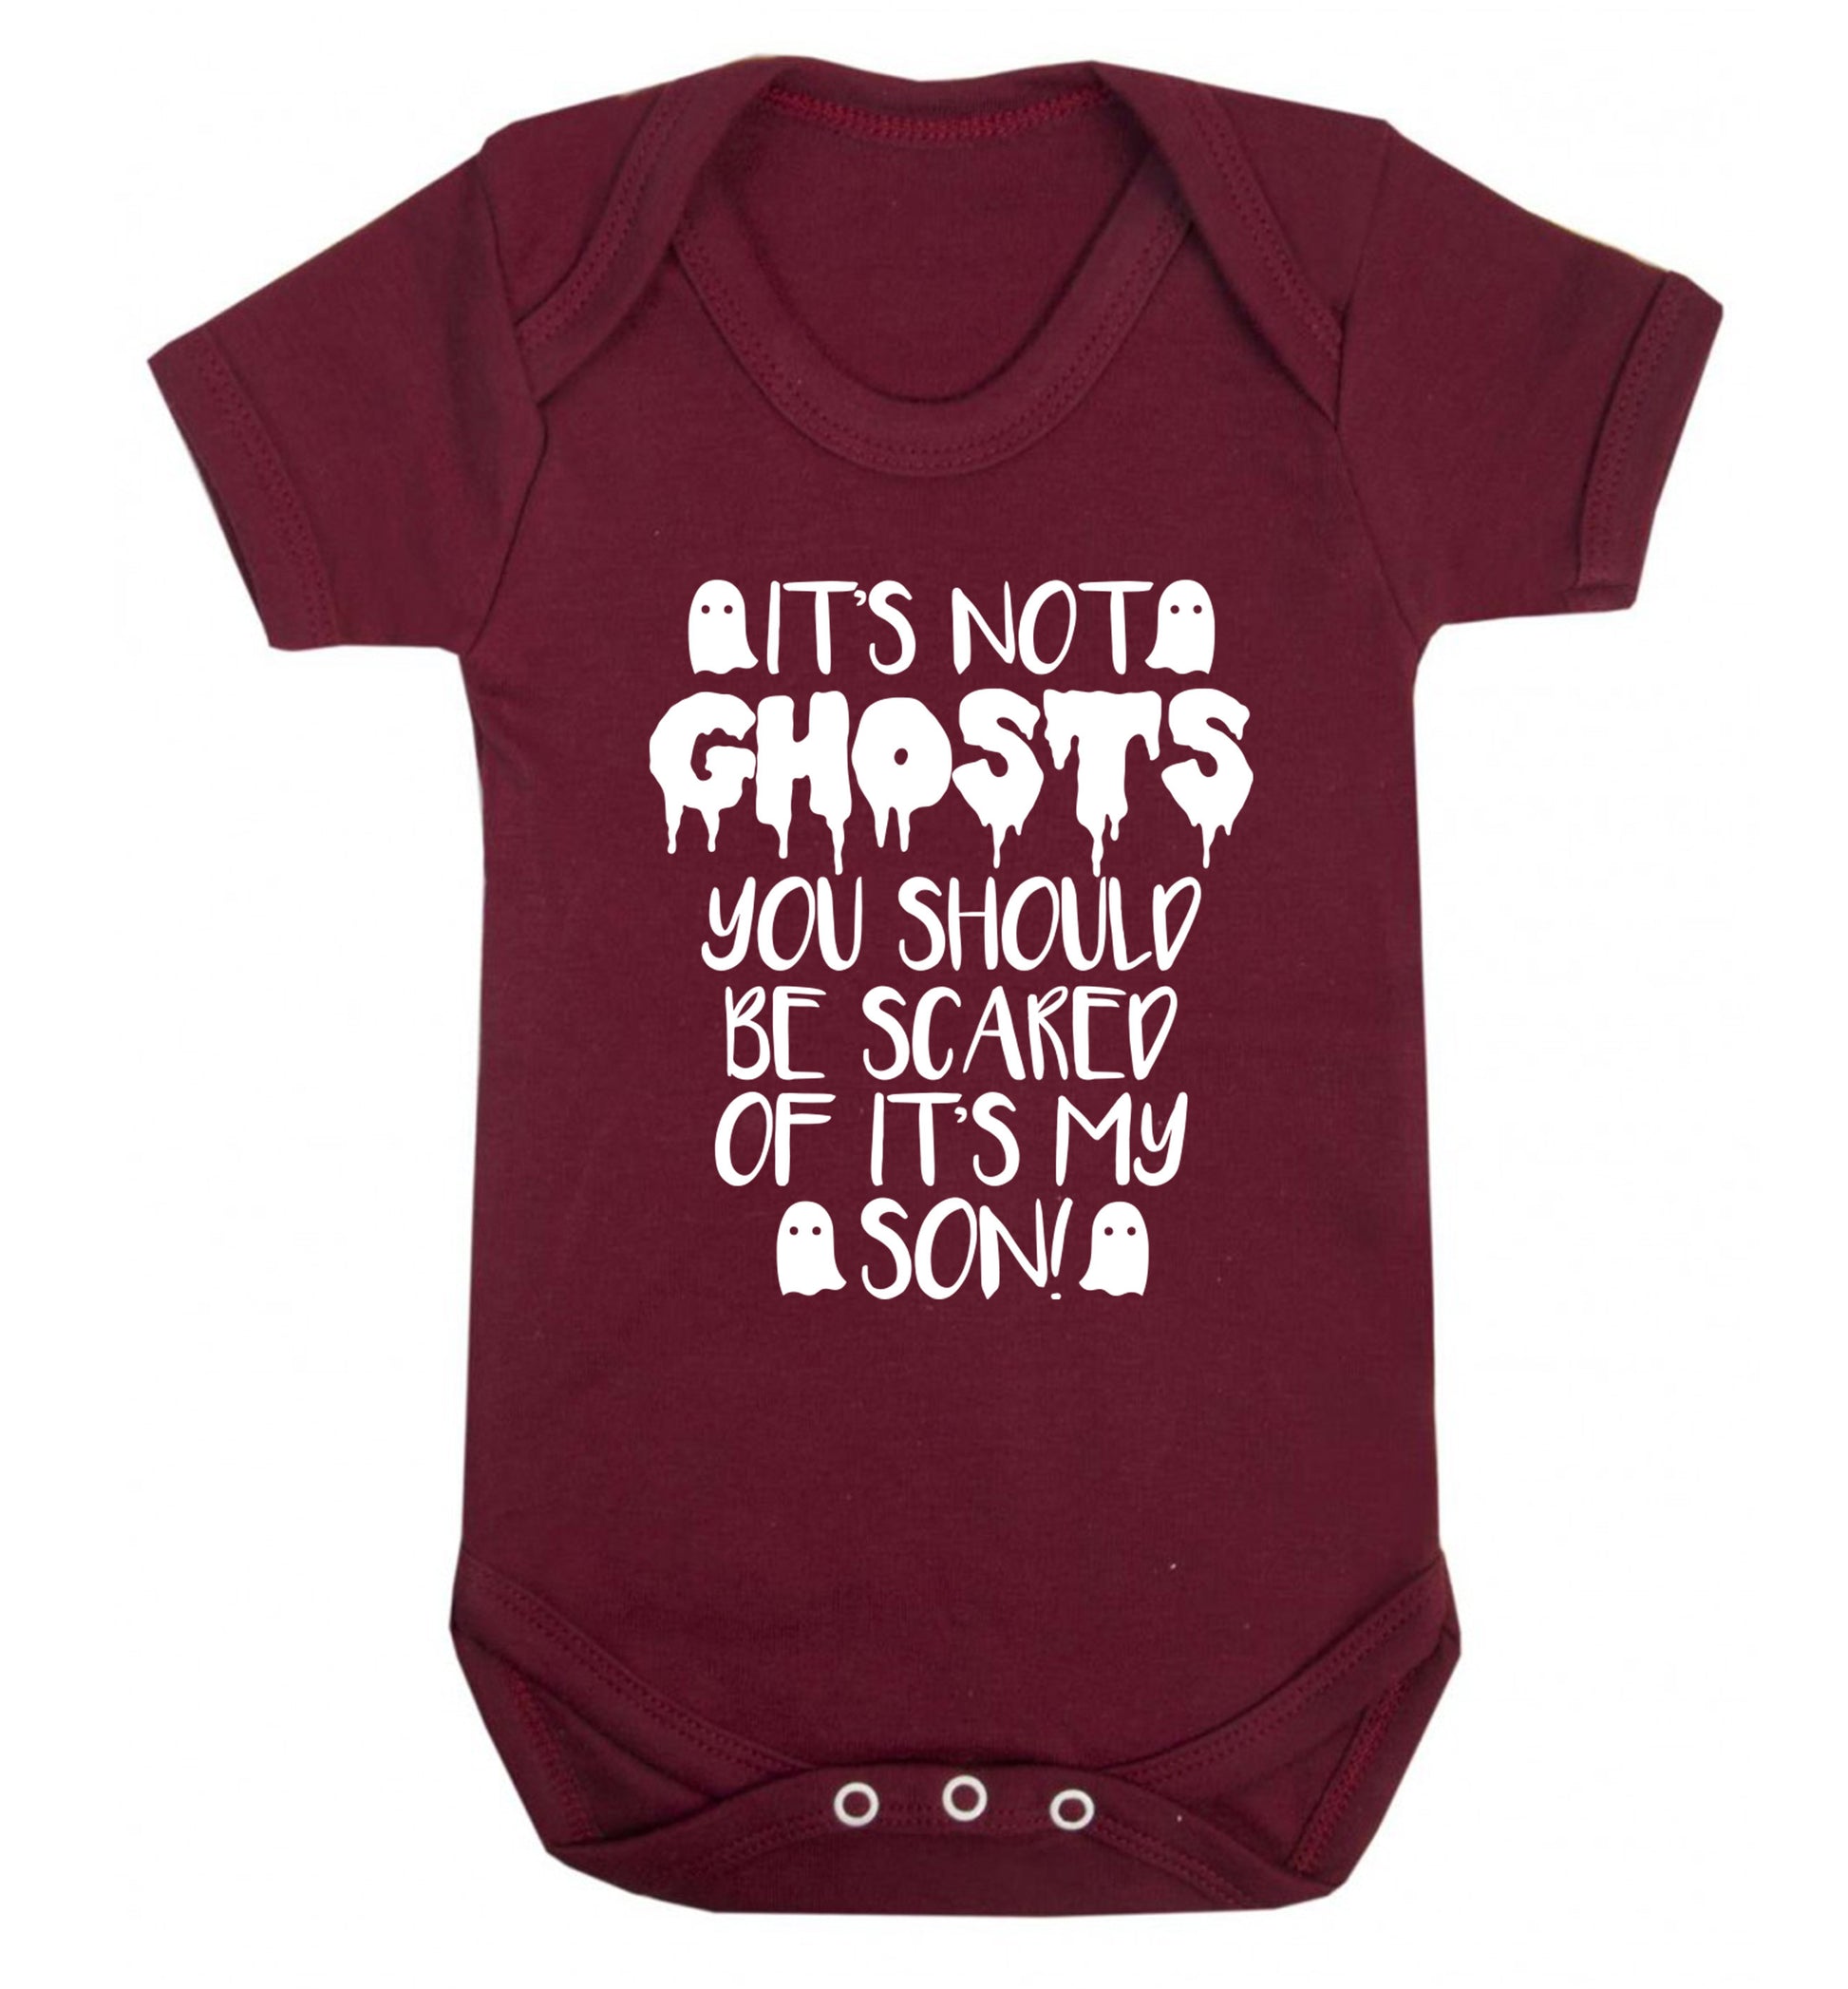 It's not ghosts you should be scared of it's my son! Baby Vest maroon 18-24 months